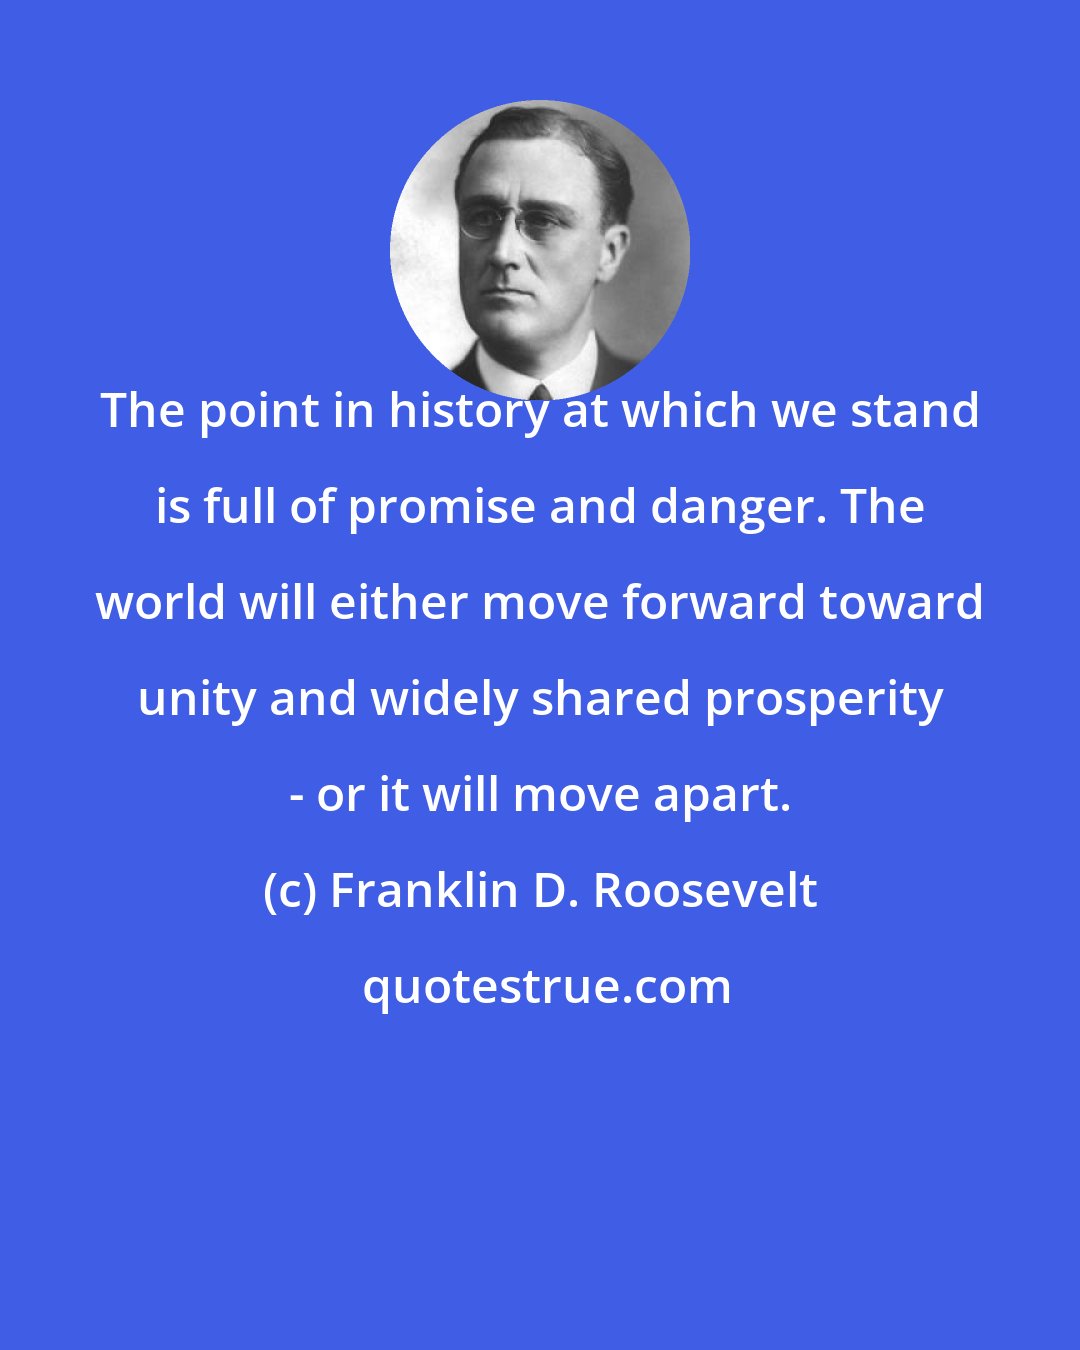 Franklin D. Roosevelt: The point in history at which we stand is full of promise and danger. The world will either move forward toward unity and widely shared prosperity - or it will move apart.